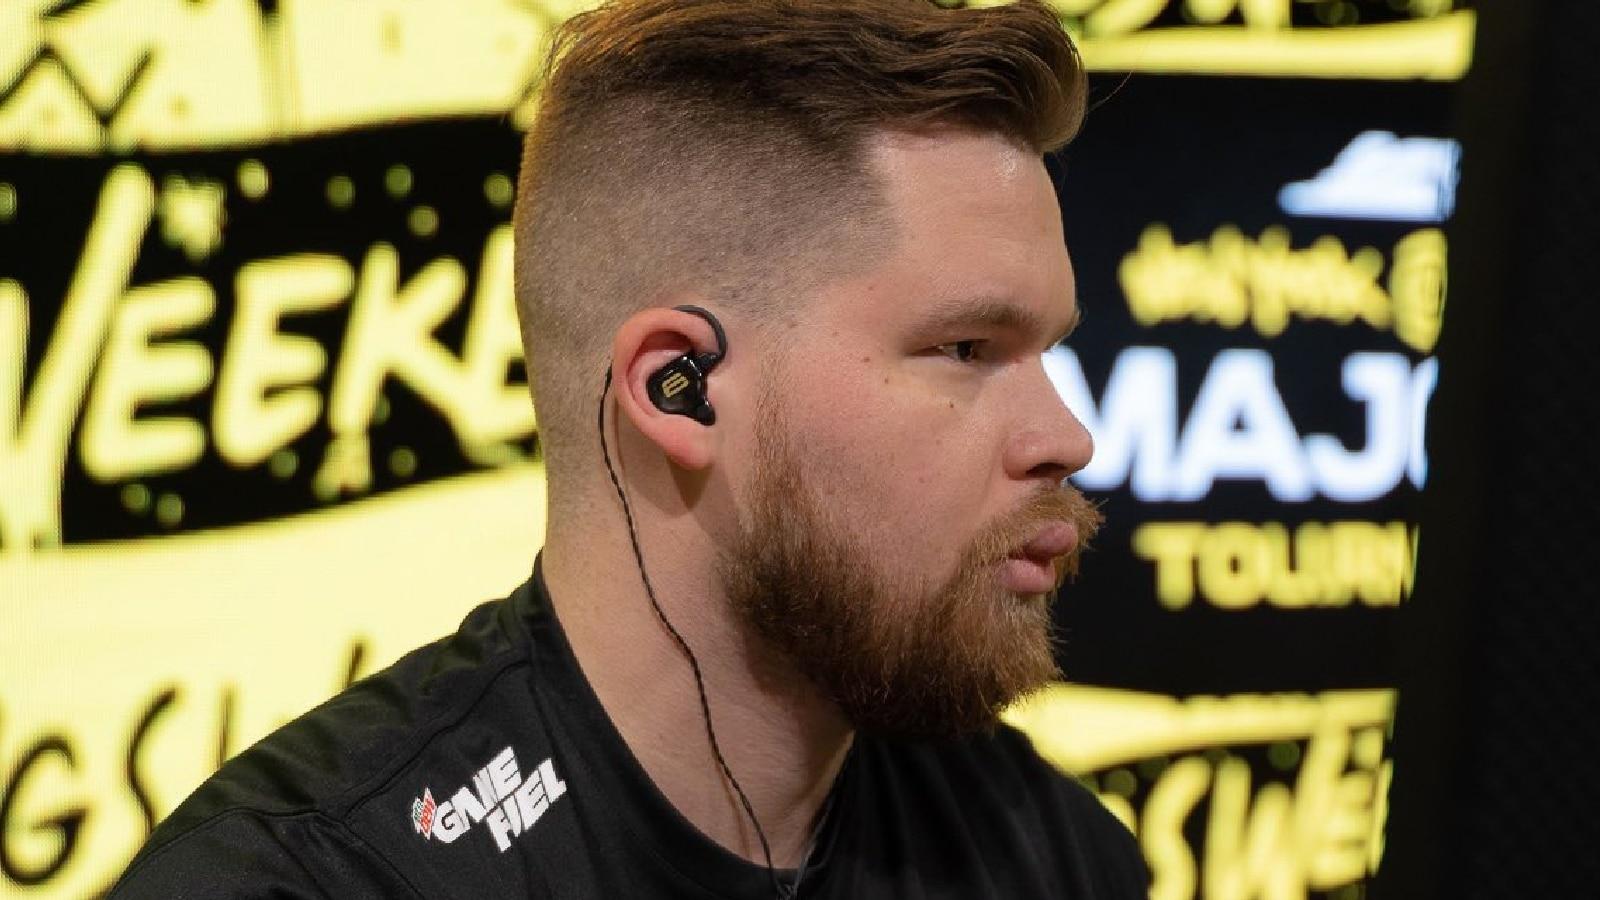 Crimsix playing for New York Subliners